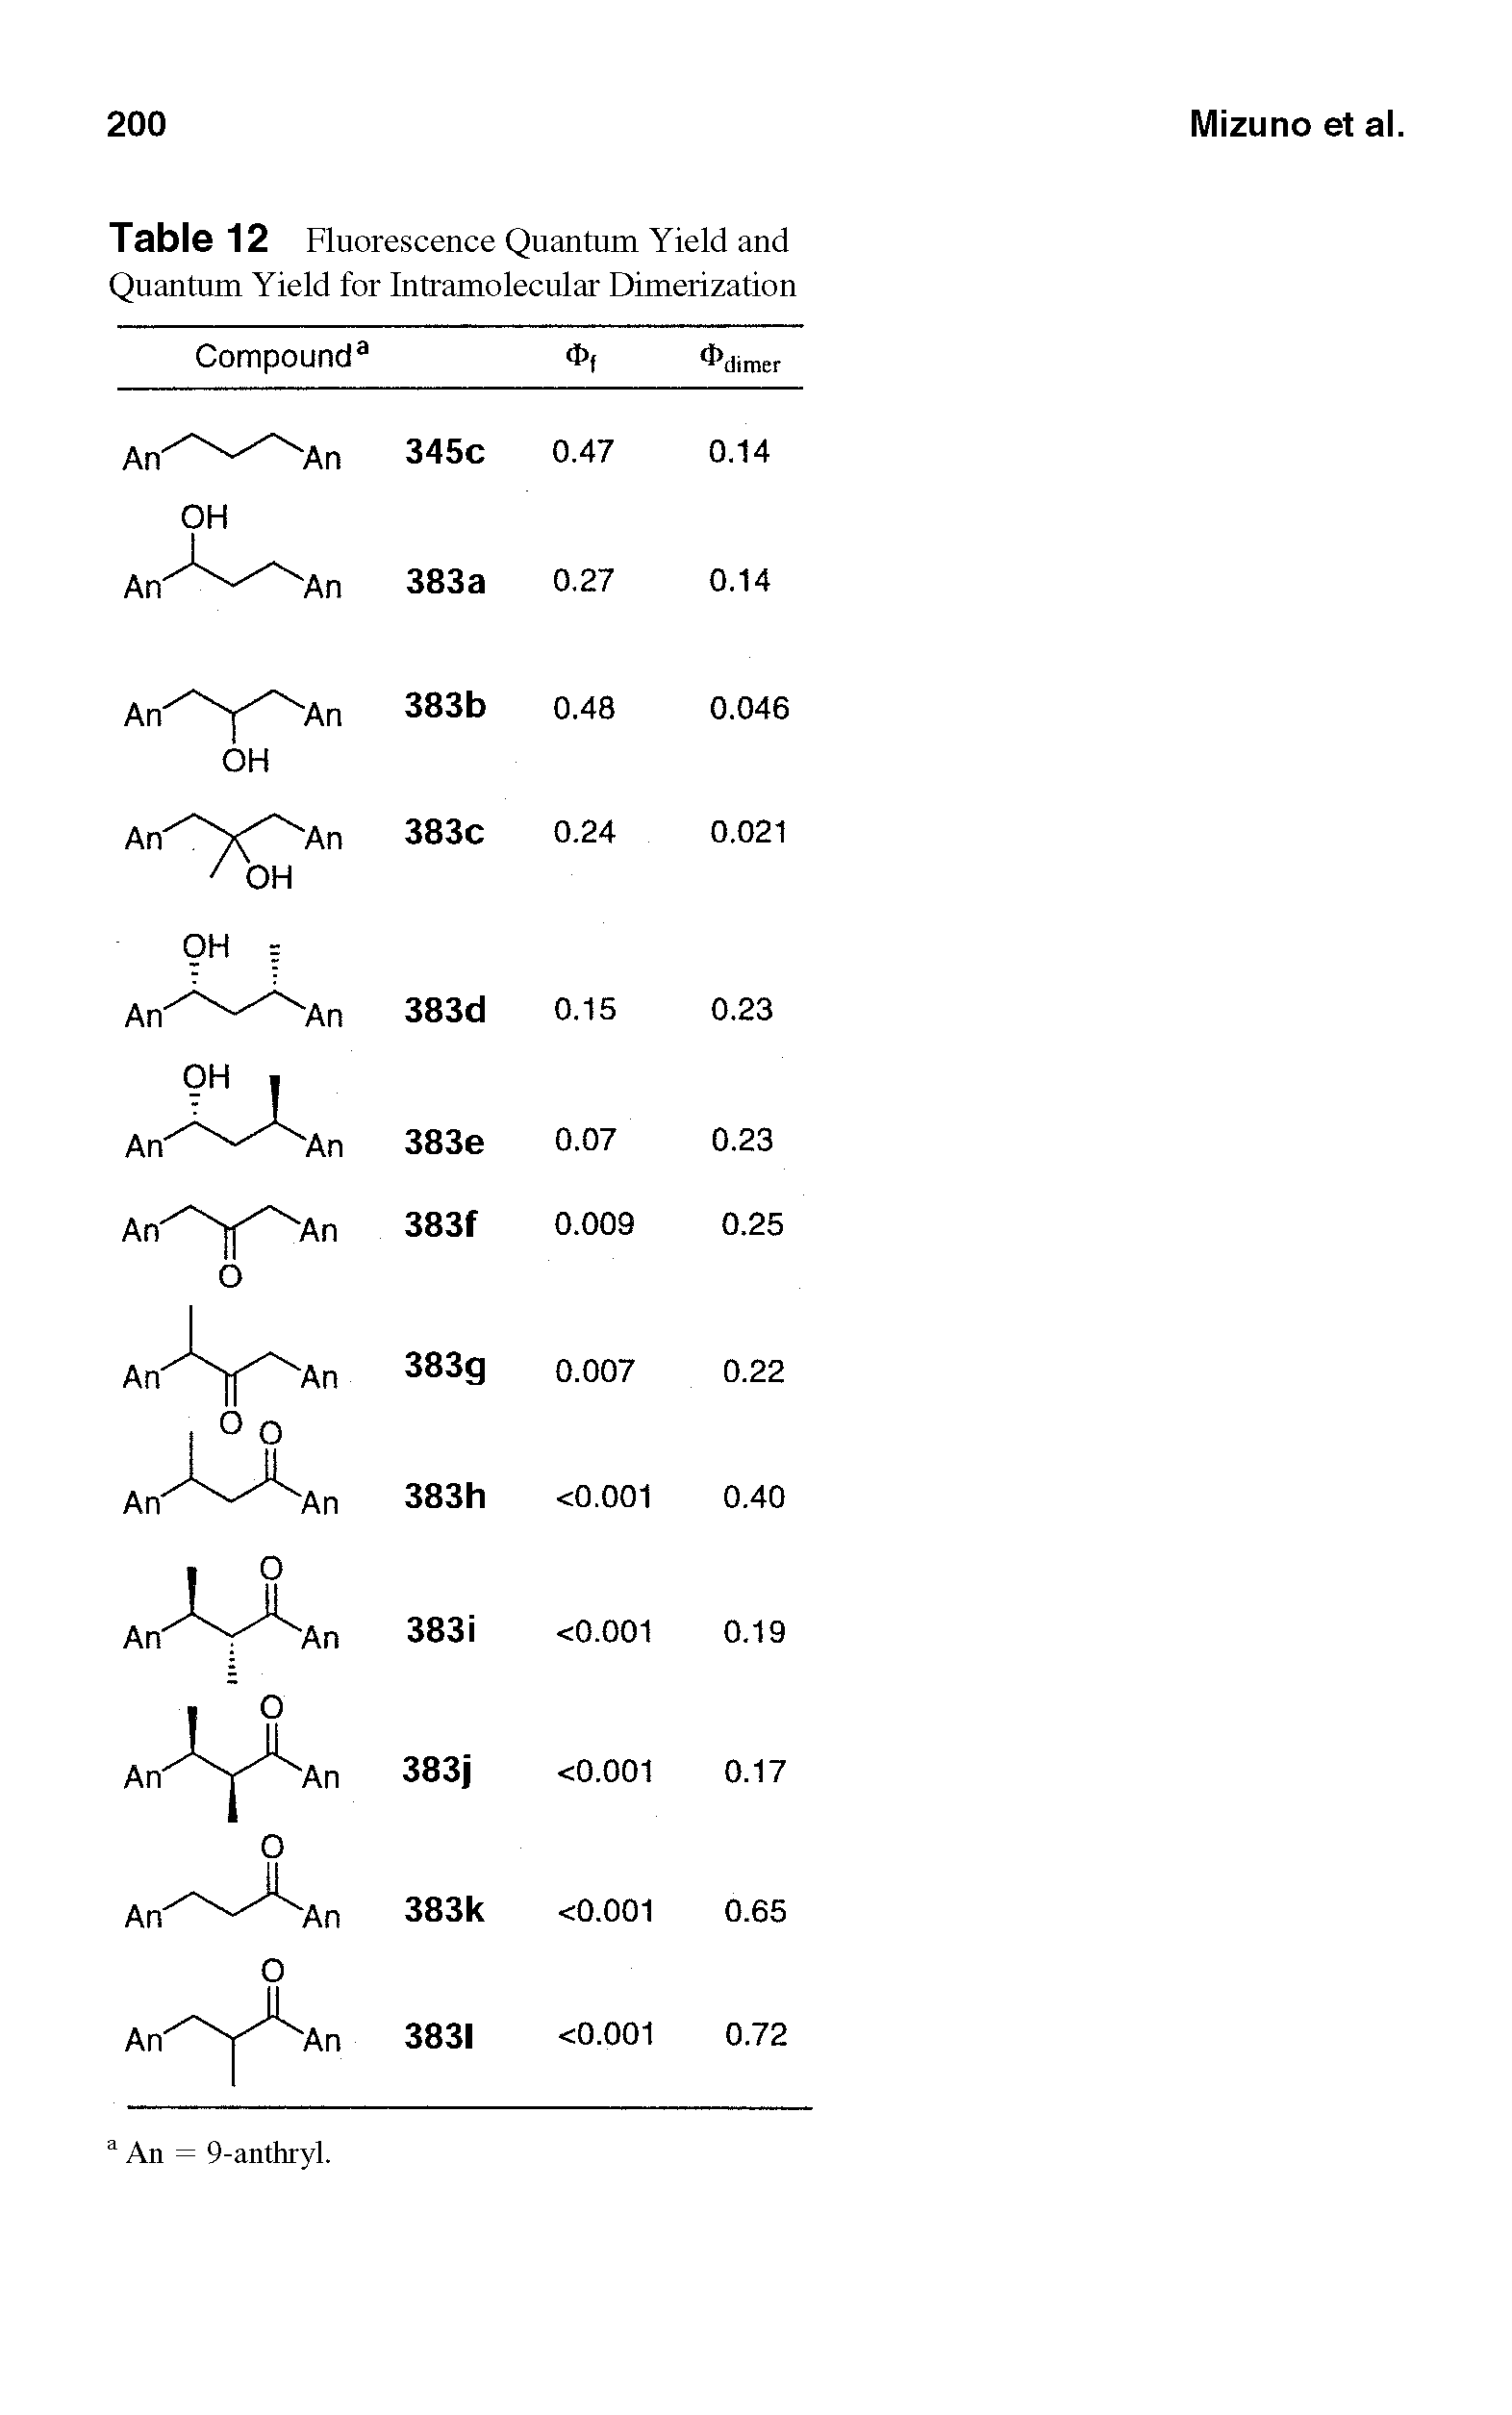 Table 12 Fluorescence Quantum Yield and Quantum Yield for Intramolecular Dimerization...